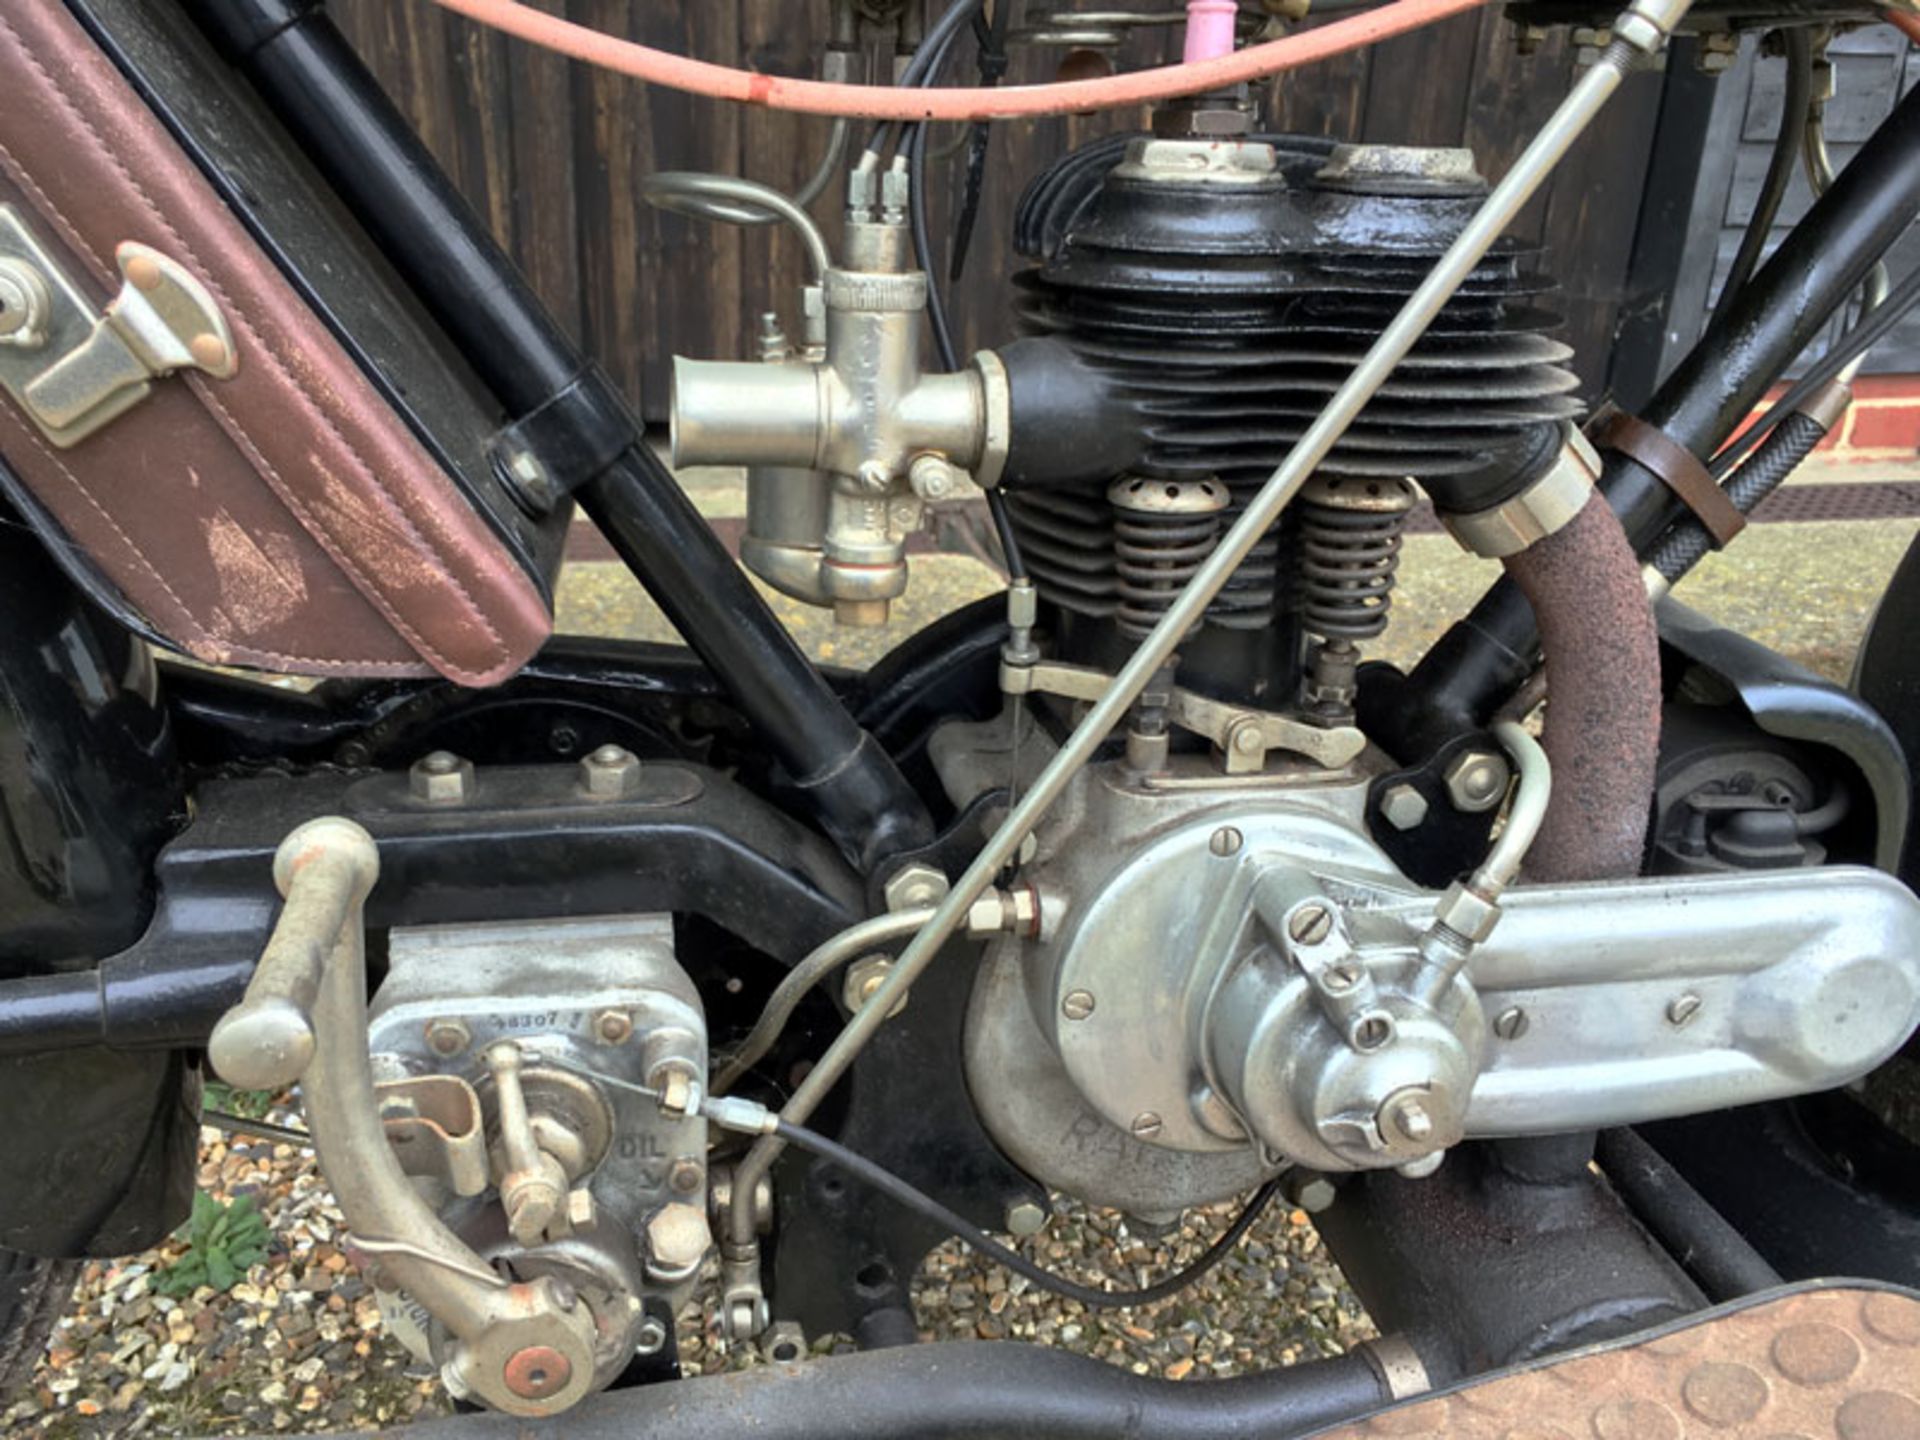 1926 Raleigh Model 5 - Image 3 of 5